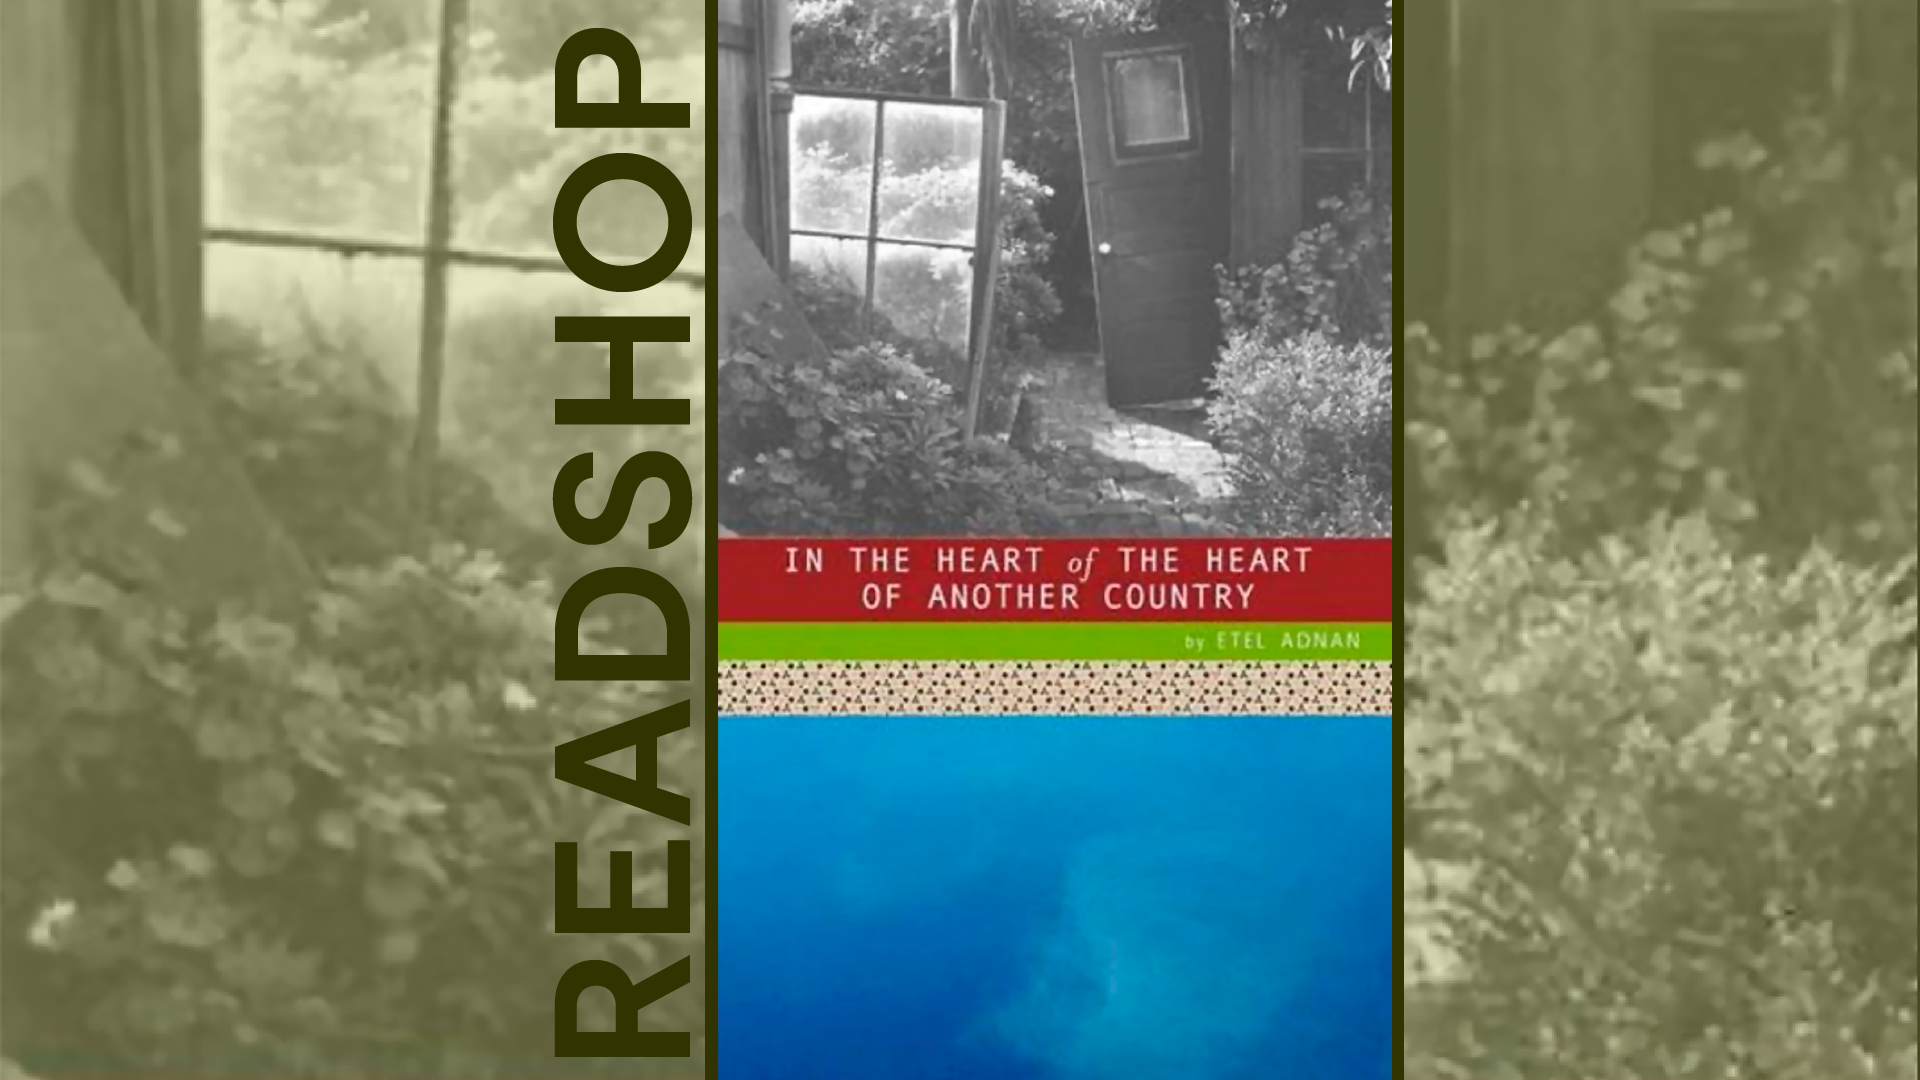 Promotional banner with cover of In the Heart of the Heart of Another Country by Etel Adnan in the center, an extreme close up of cover detail in the background, 